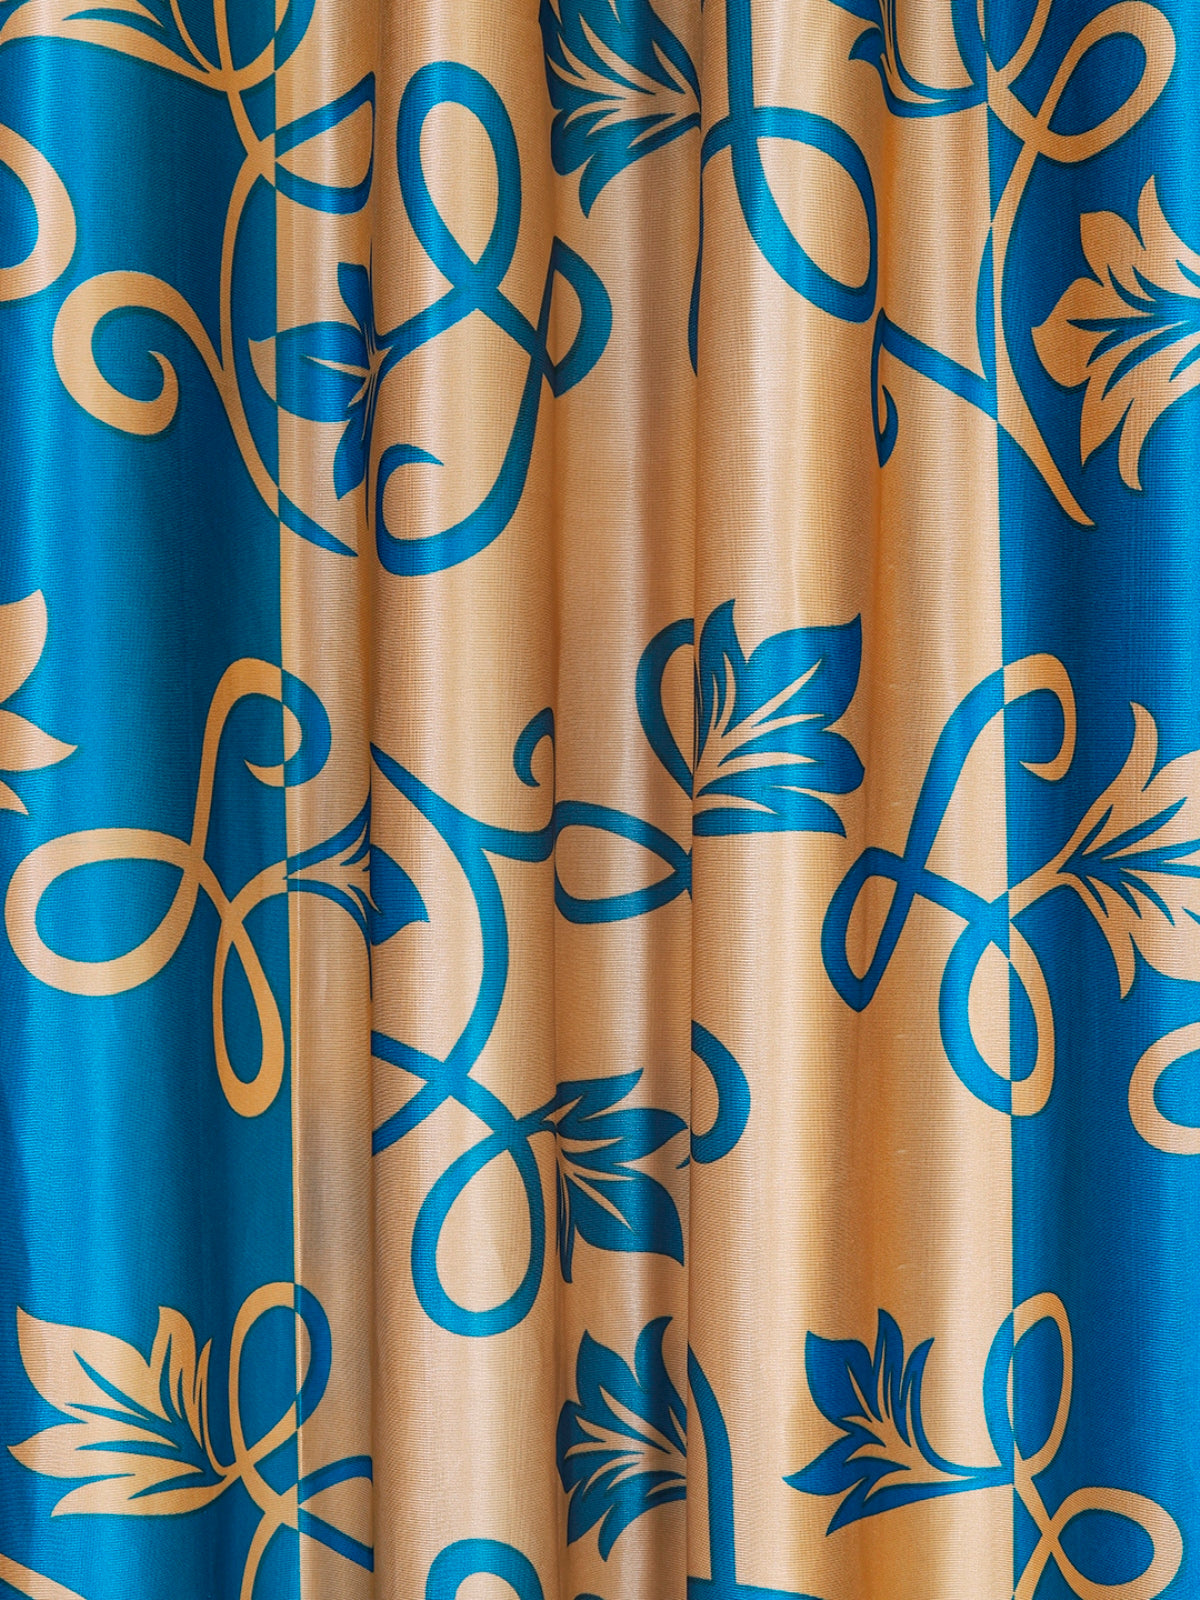 Romee Gold & Blue Floral Patterned Set of 2 Window Curtains